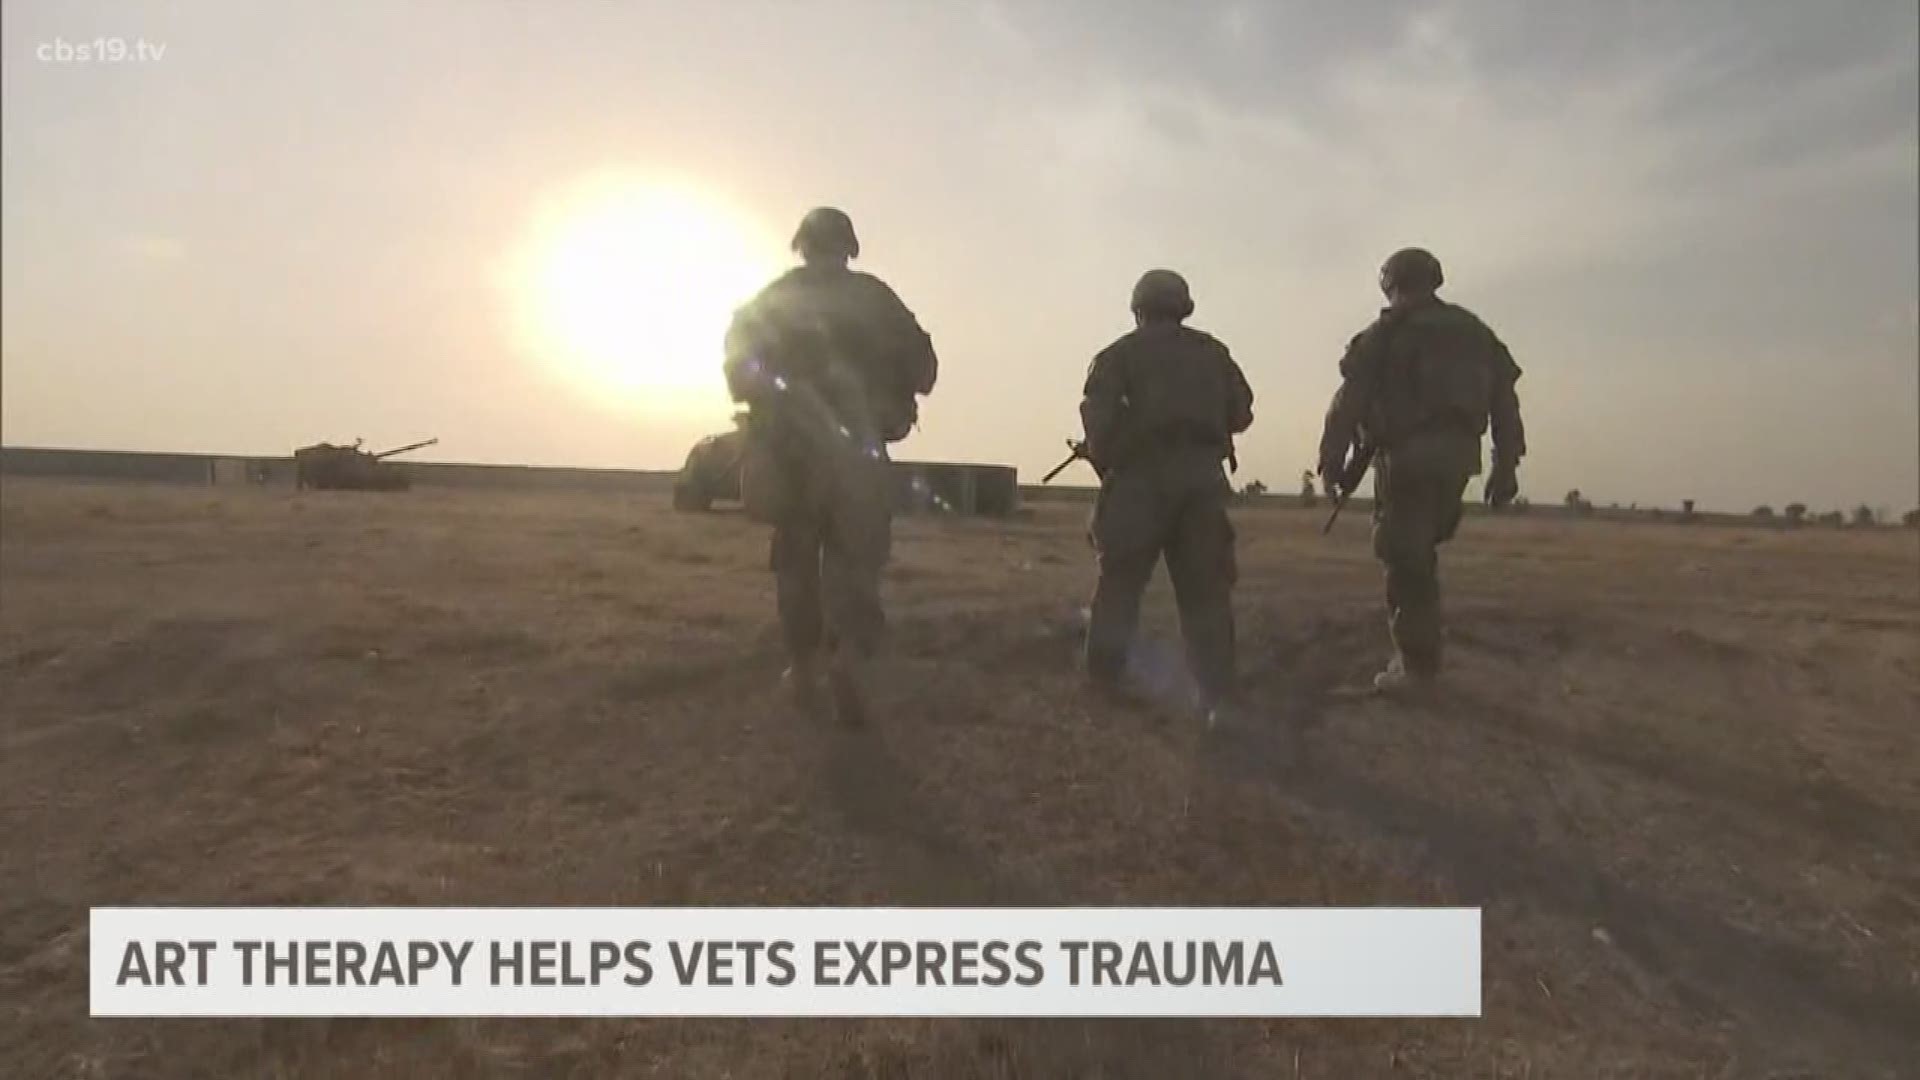 Art therapy helps veterans cope with trauma